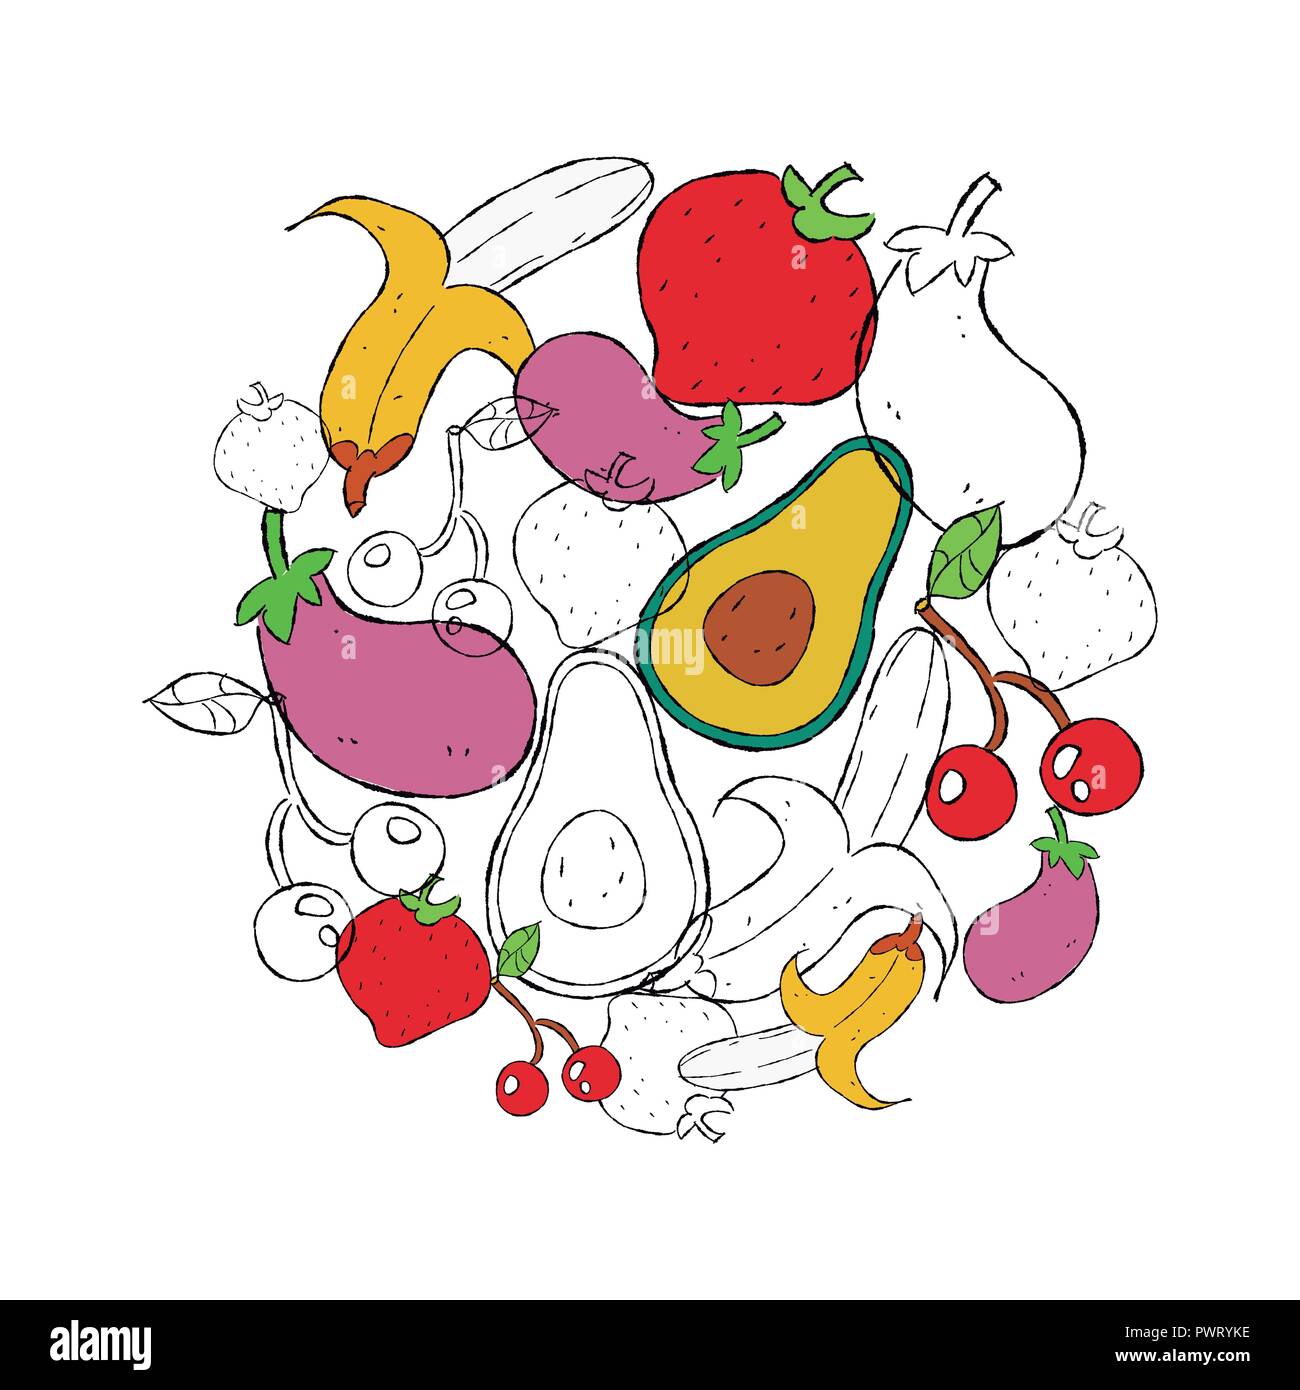 Fruit and Vegetables hand drawn illustration for healthy eating or organic food concept. Stock Vector